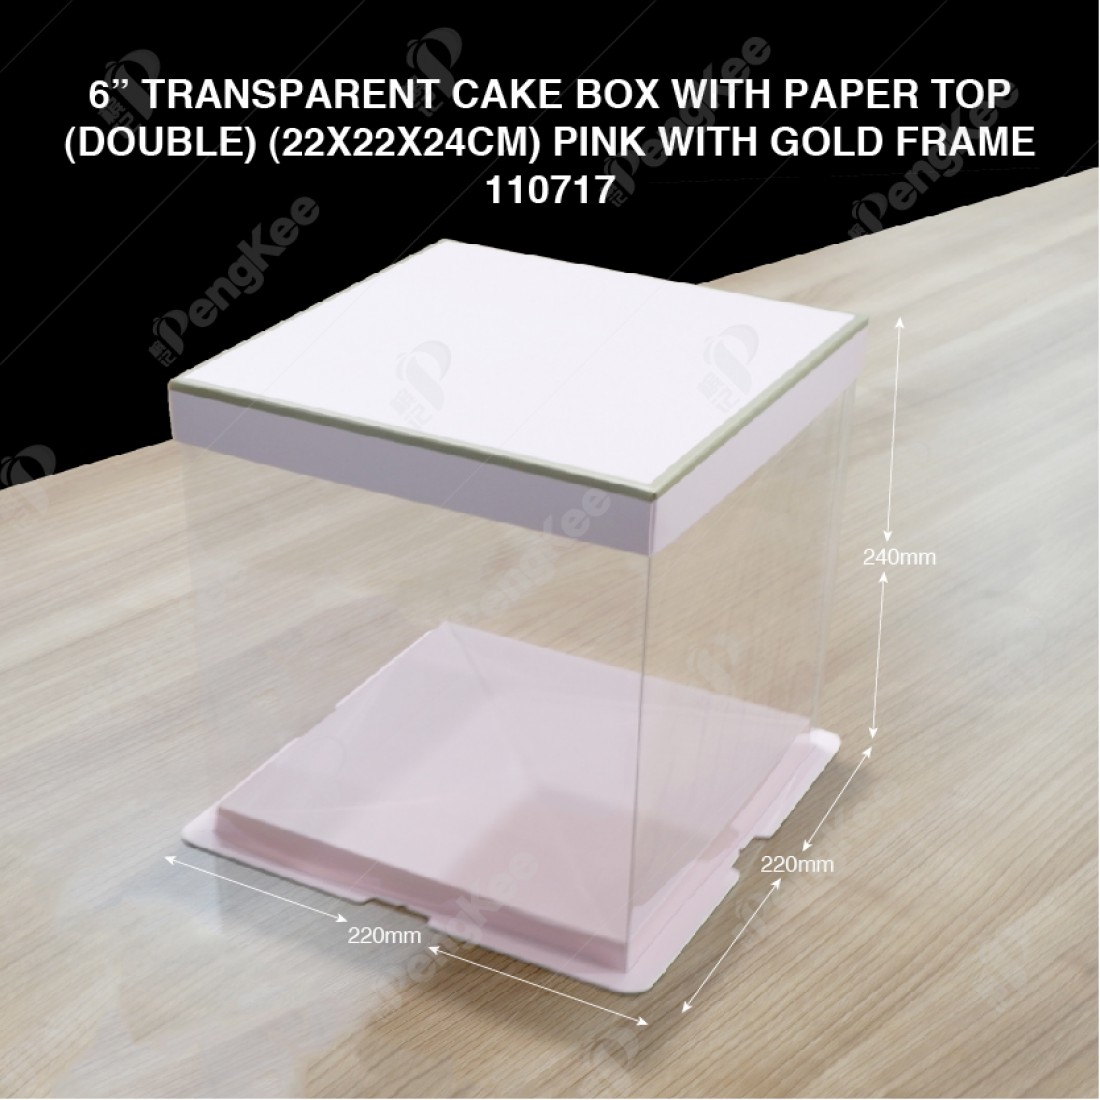 6" TRANSPARENT CAKE BOX WITH PAPER TOP(DOUBLE) (22*22*24CM)- PINK WITH GOLD FRAME